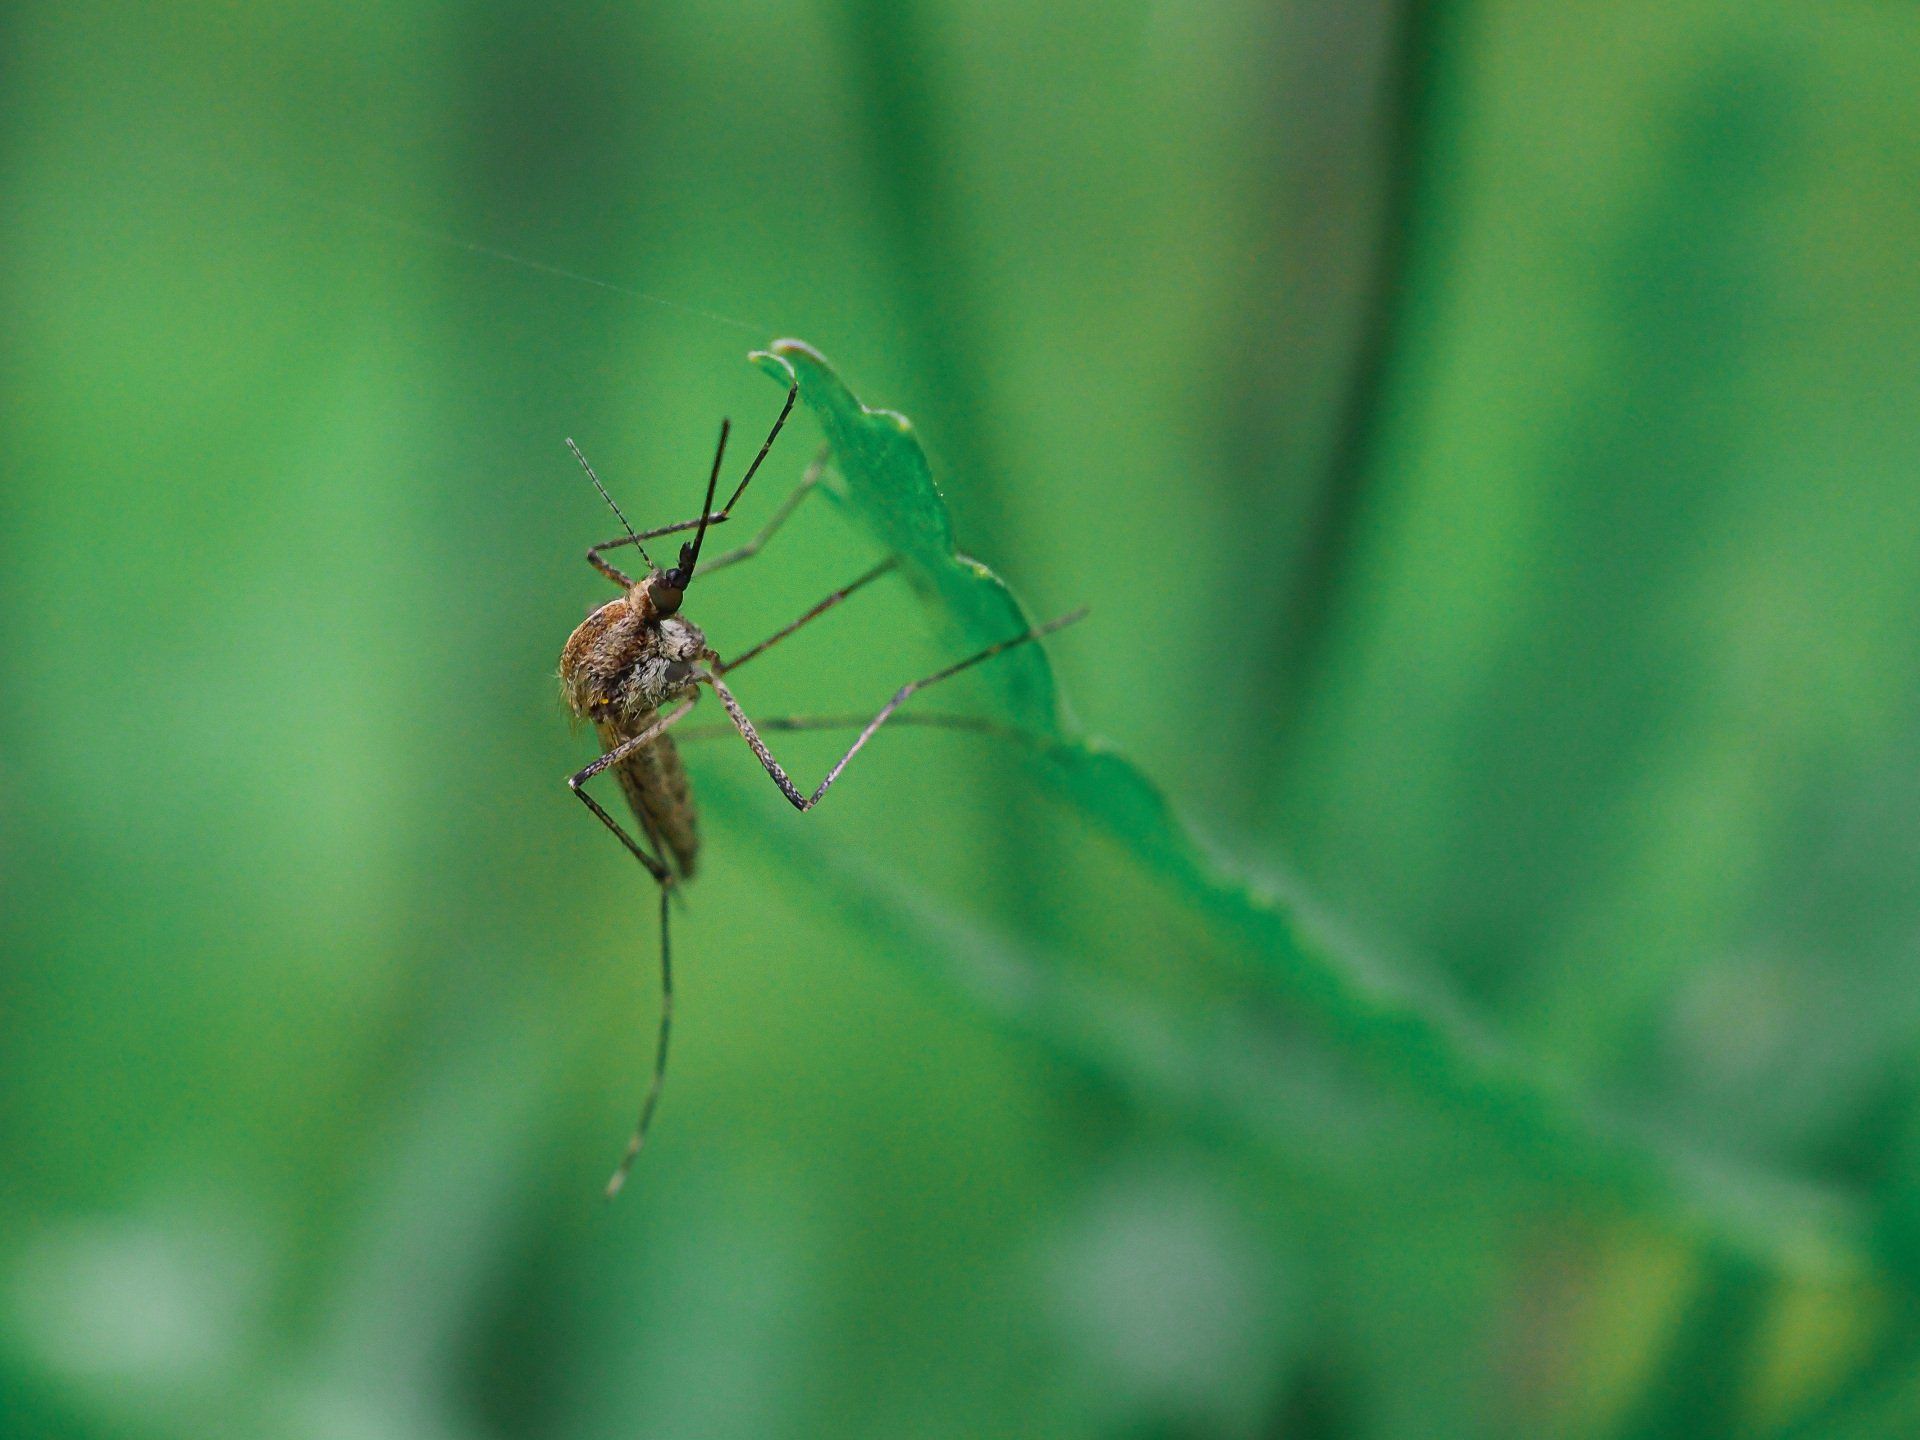 A mosquito is sitting on a green leaf.